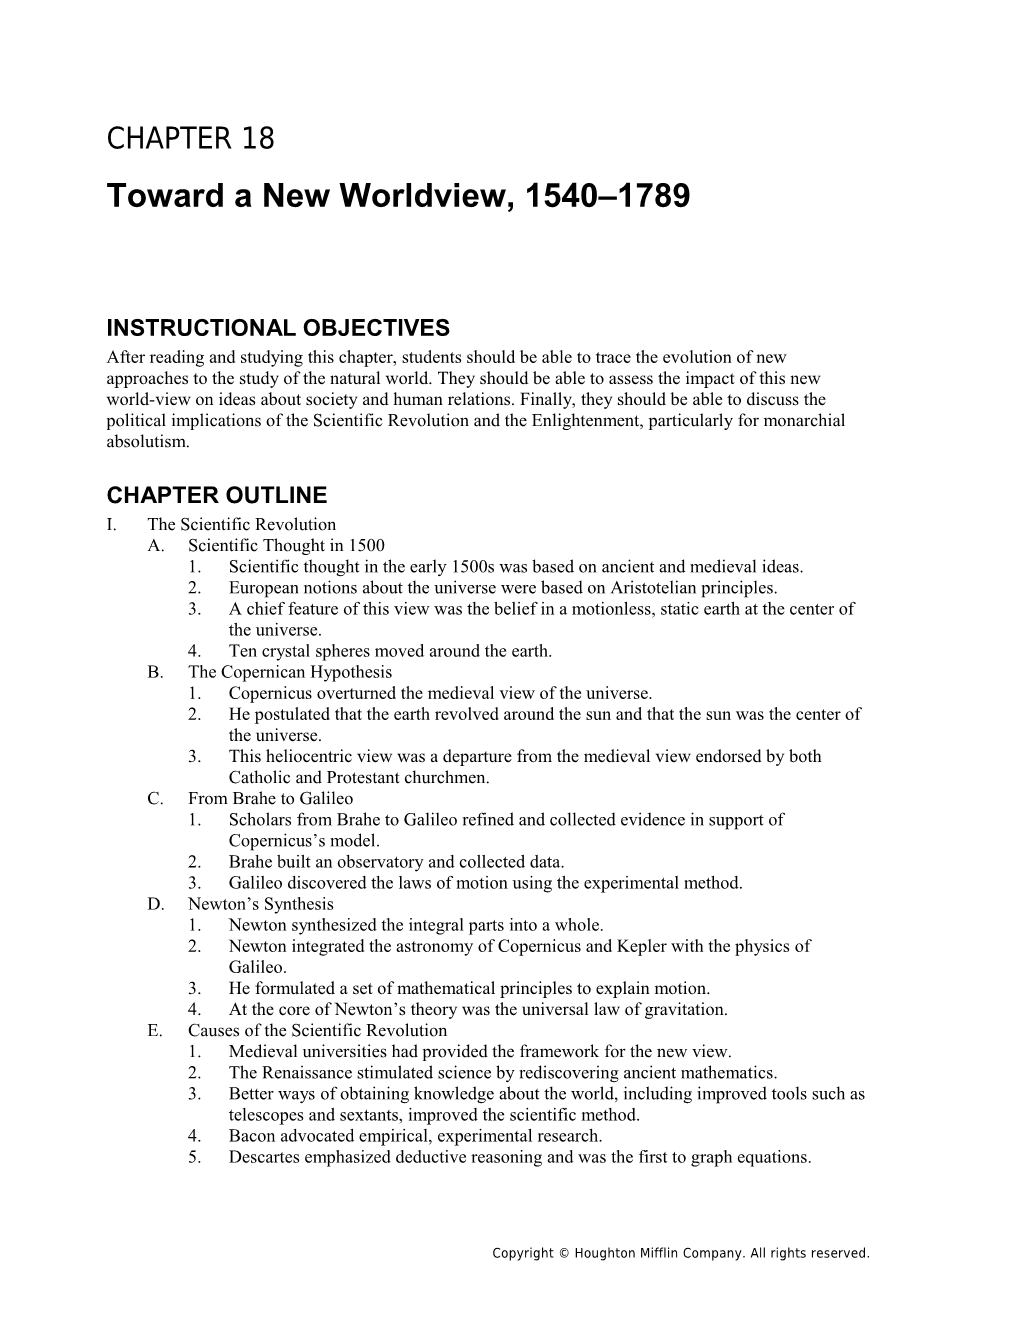 Chapter 18: Toward a New Worldview, 1540 1789 1